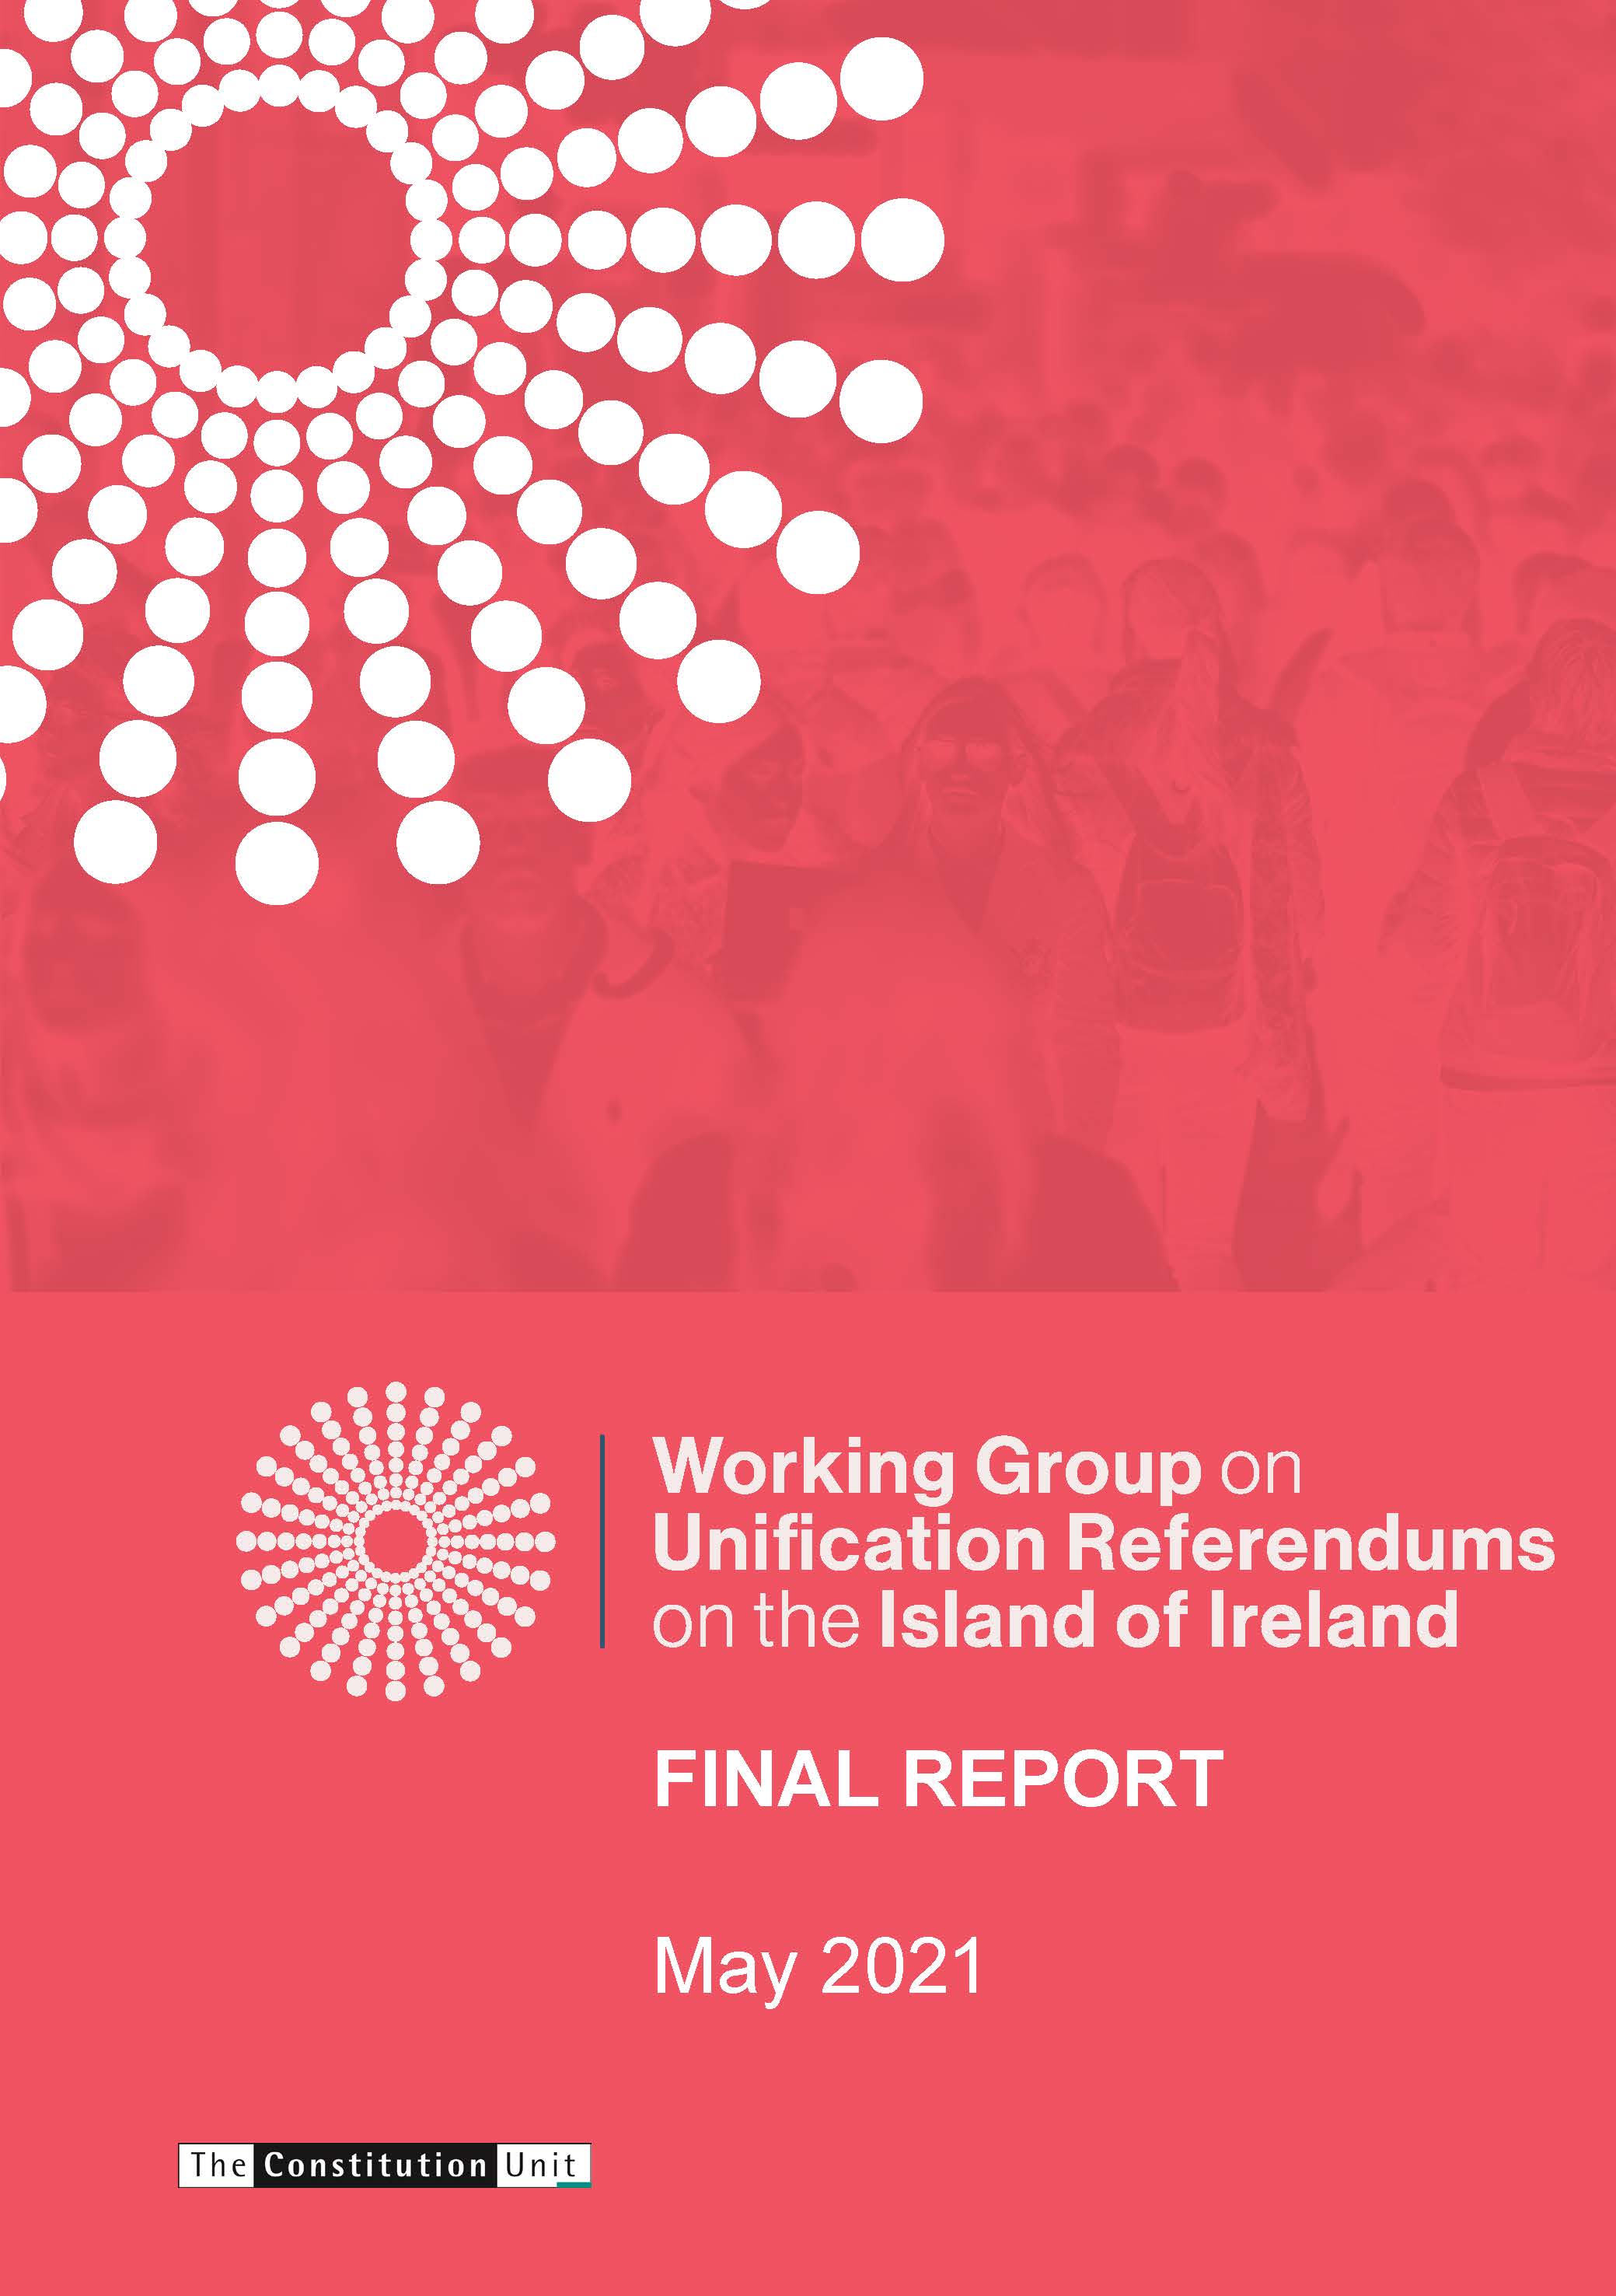 Working Group on Unification Referendums on the Island of Ireland: Final Report 